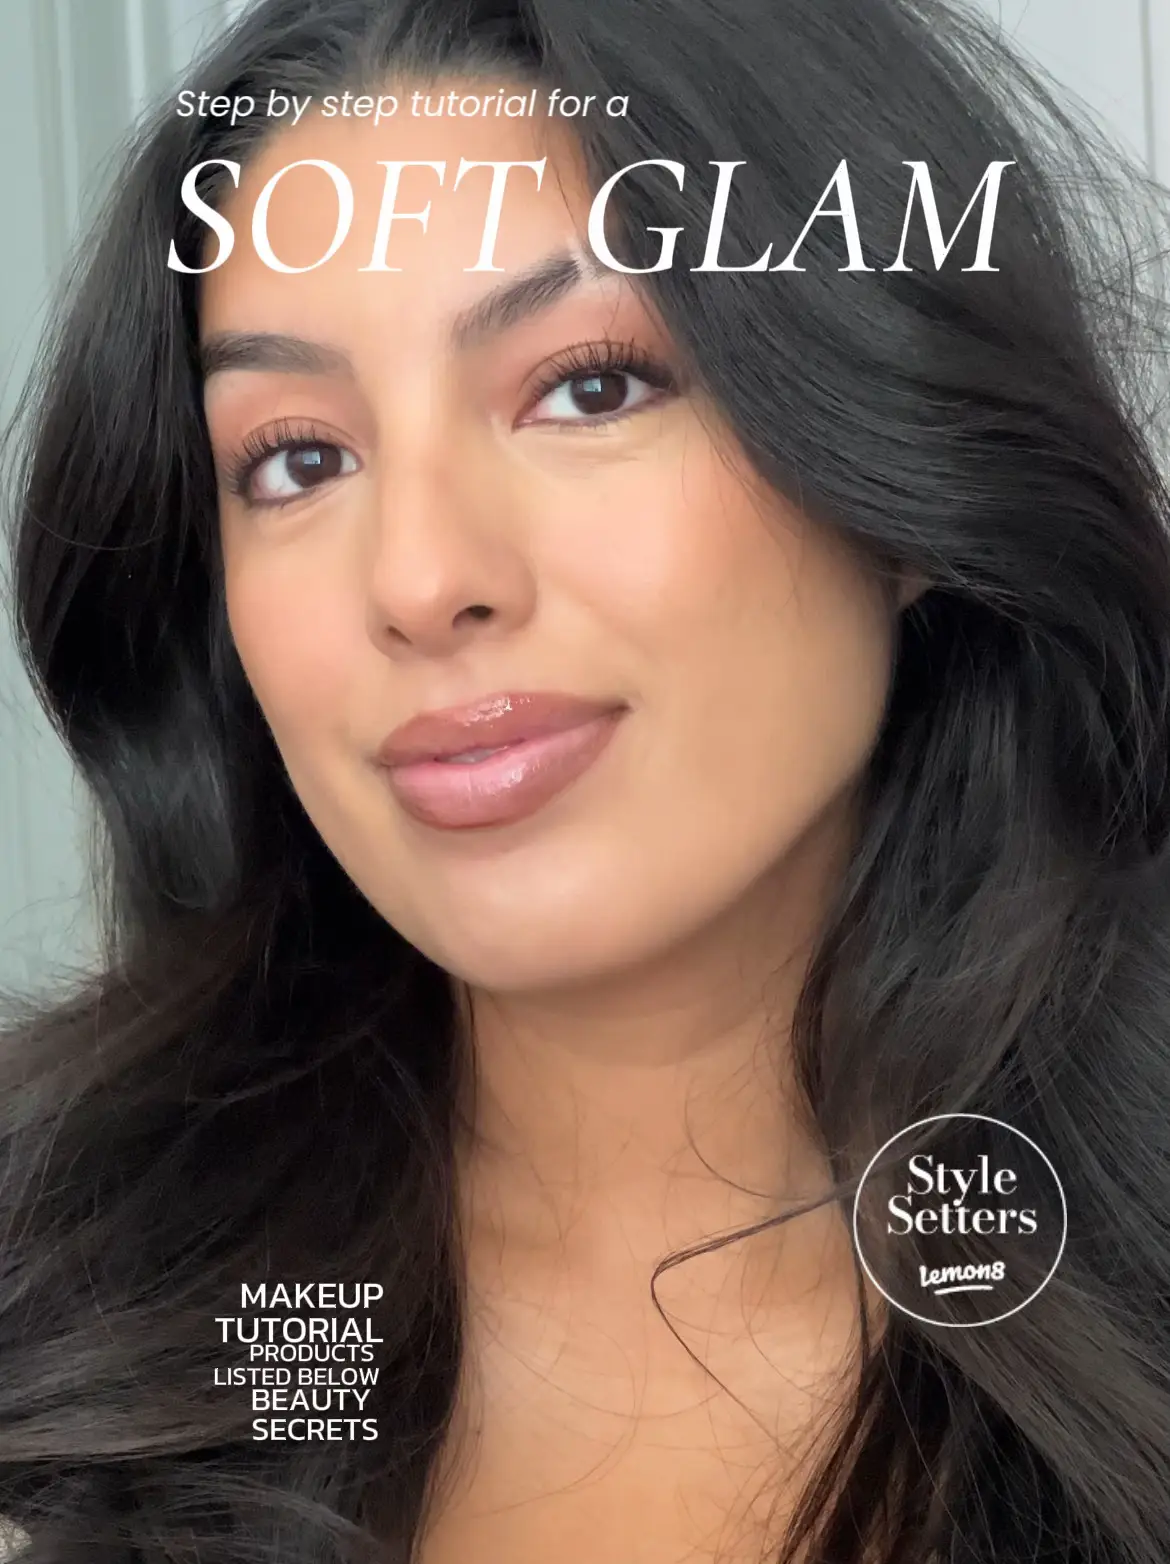 How To Create a Soft Glam Makeup Look: Step-By-Step